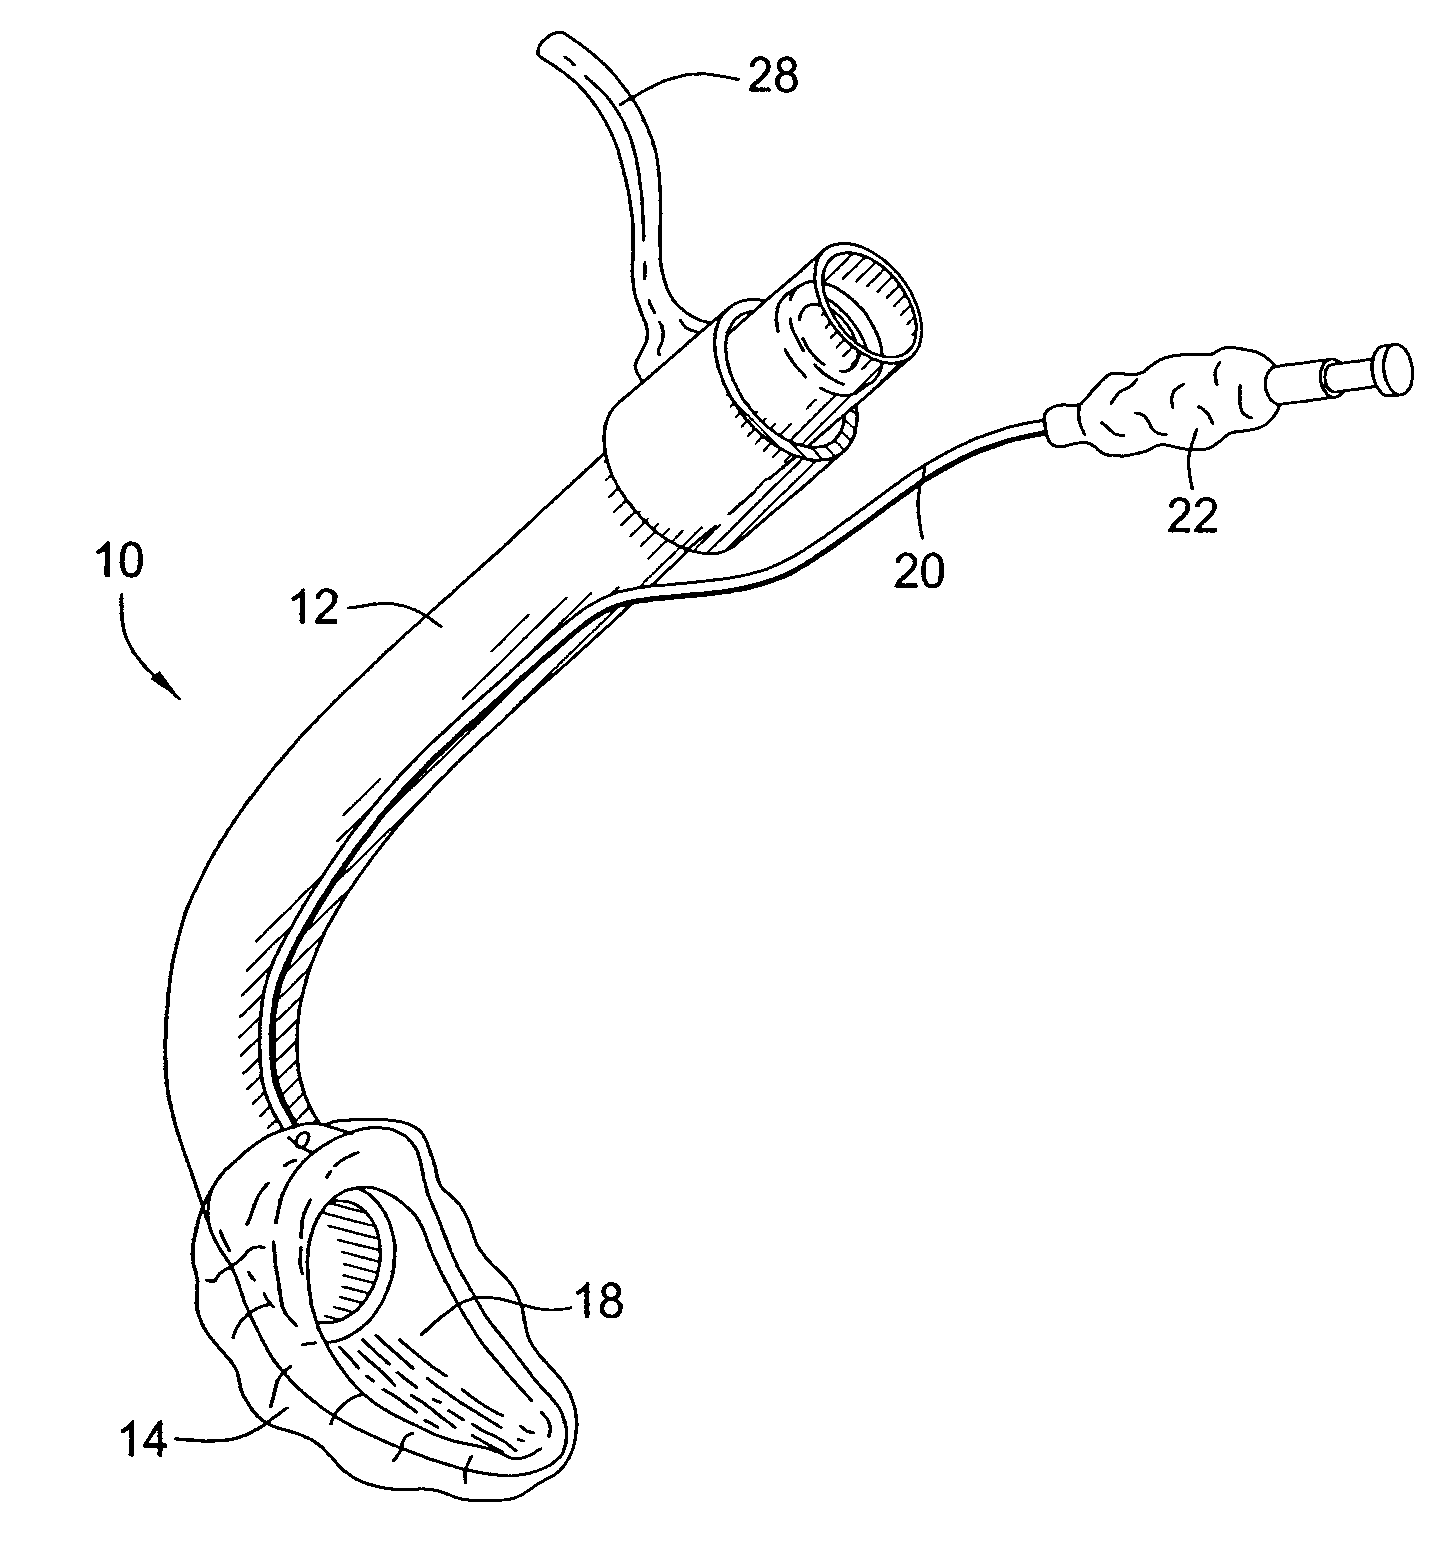 Device for insertion of endotracheal tube